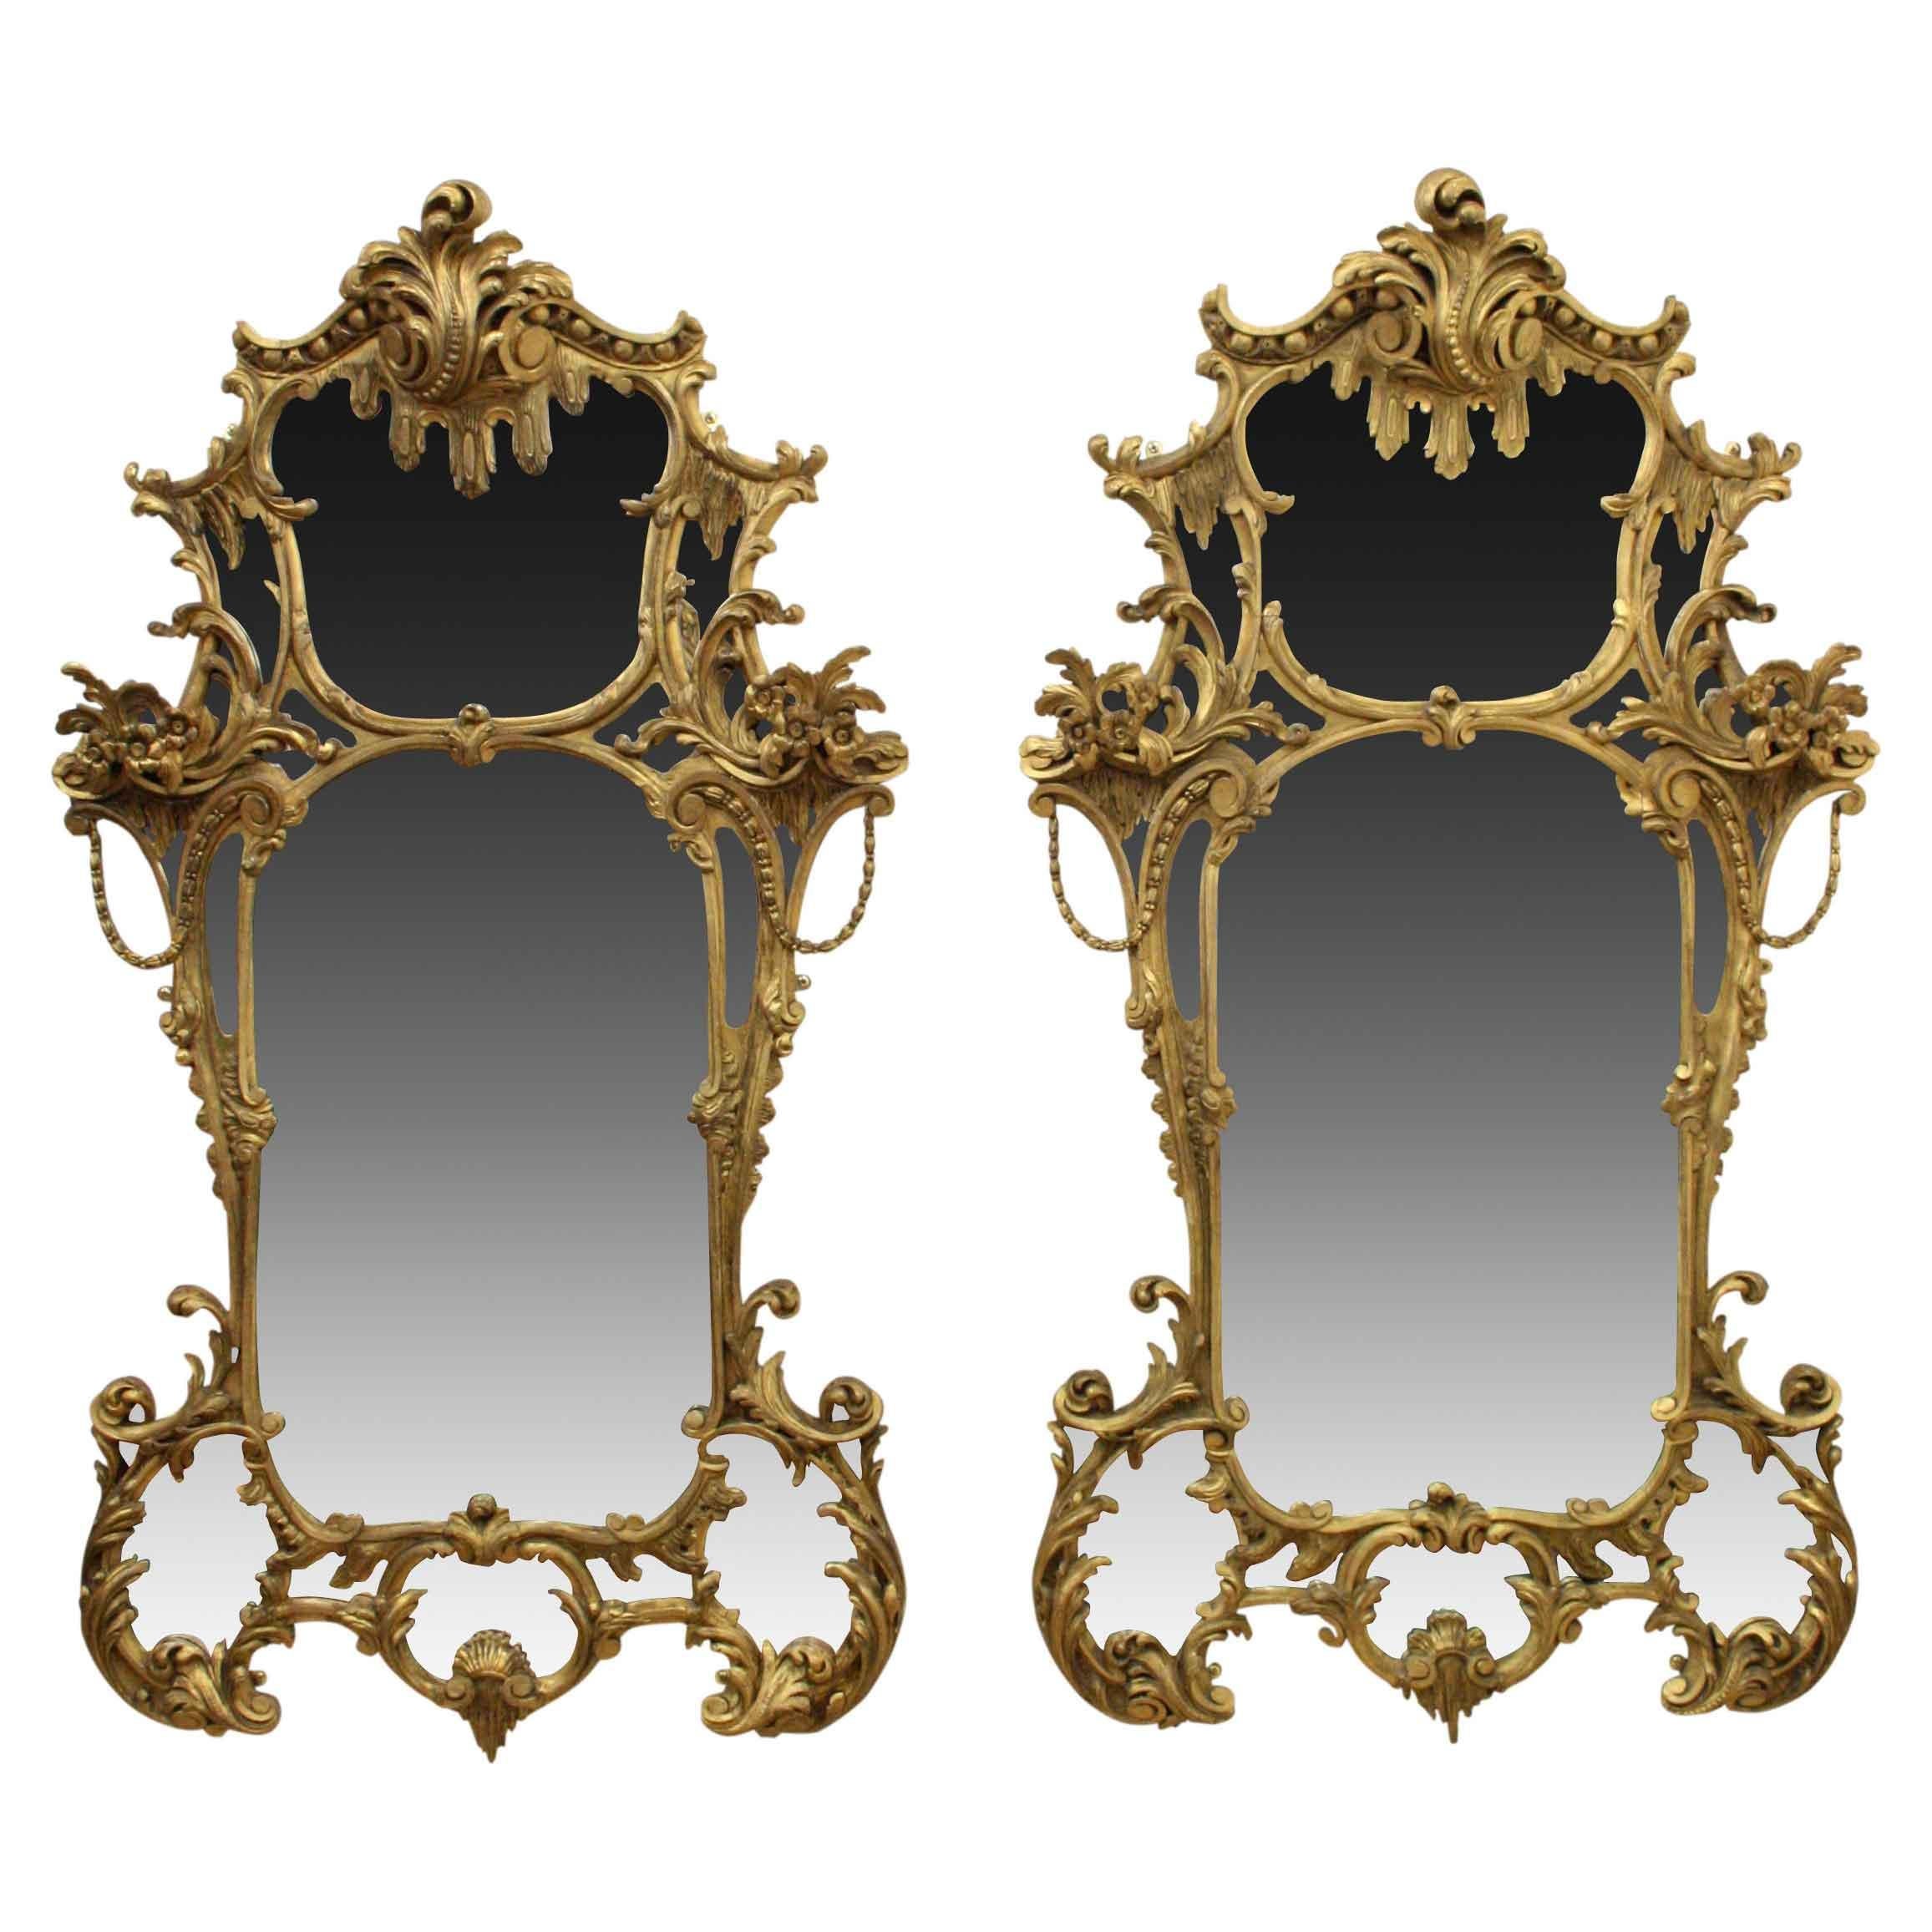 Pair of very stylish high Rococo style gilded mirrors, circa 1860. The mirrors comprise of several small mirrors, each enclosed in a carved wood and gilded frame. The top is surmounted with a wonderful foliate carving with a stylised pediment on